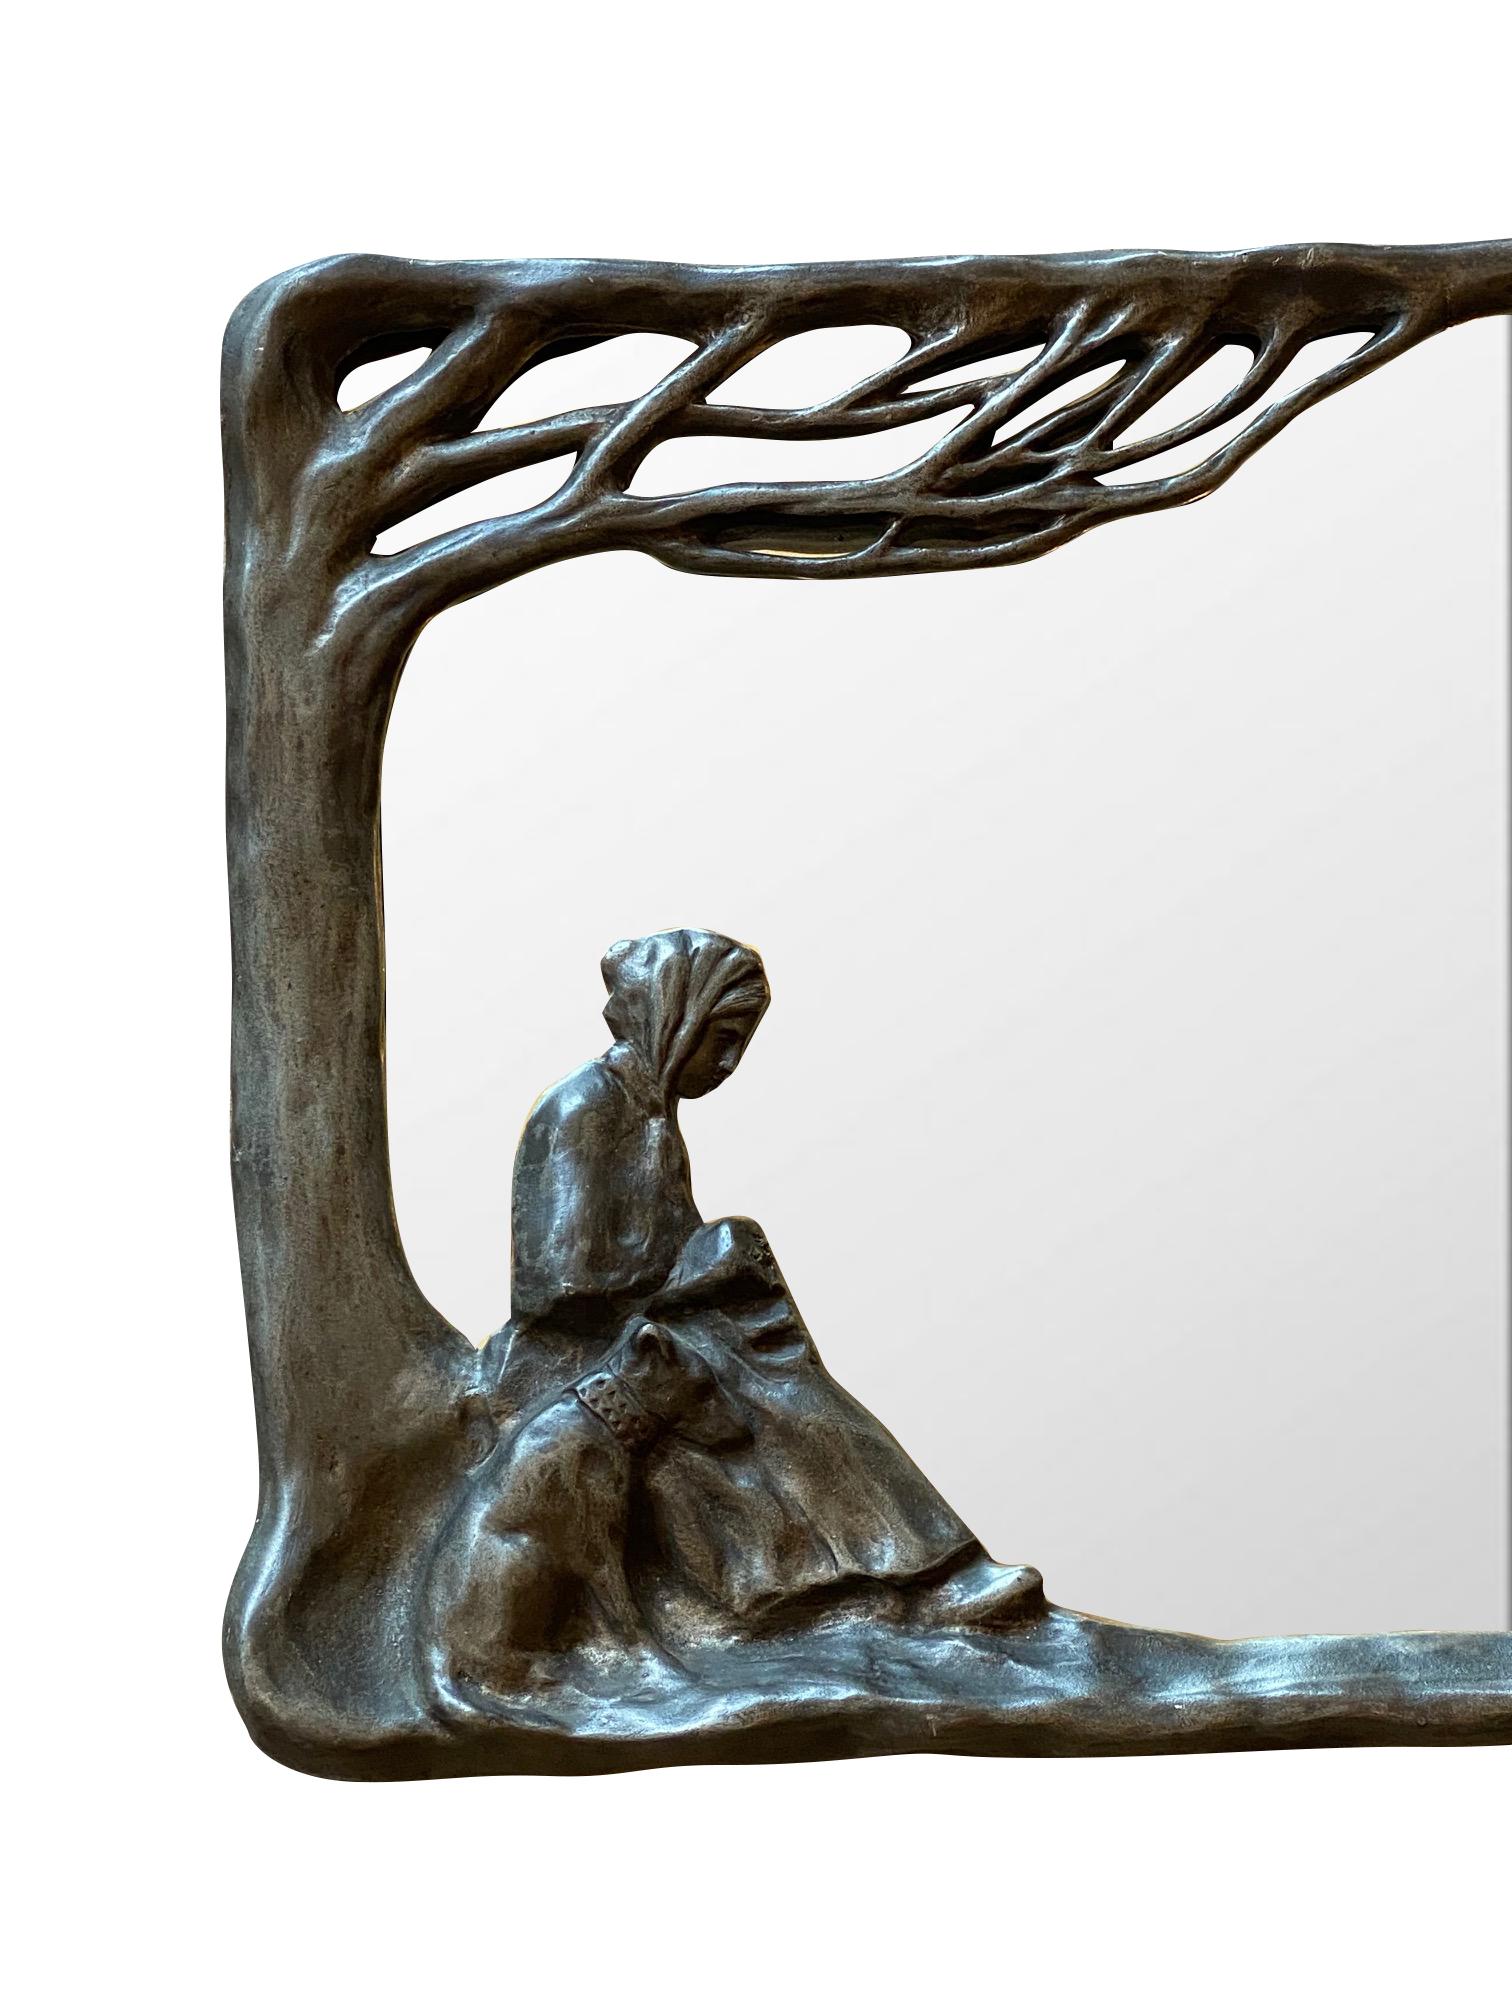 Art Nouveau wall hung mirror circa 1900 by renowned French jewelry artist Edouard Aimé Arnould. Cast patinated framework depicting a woman and her canine overlooking a grazing herd of sheep. Stamped artist's name appears on top side edge along with